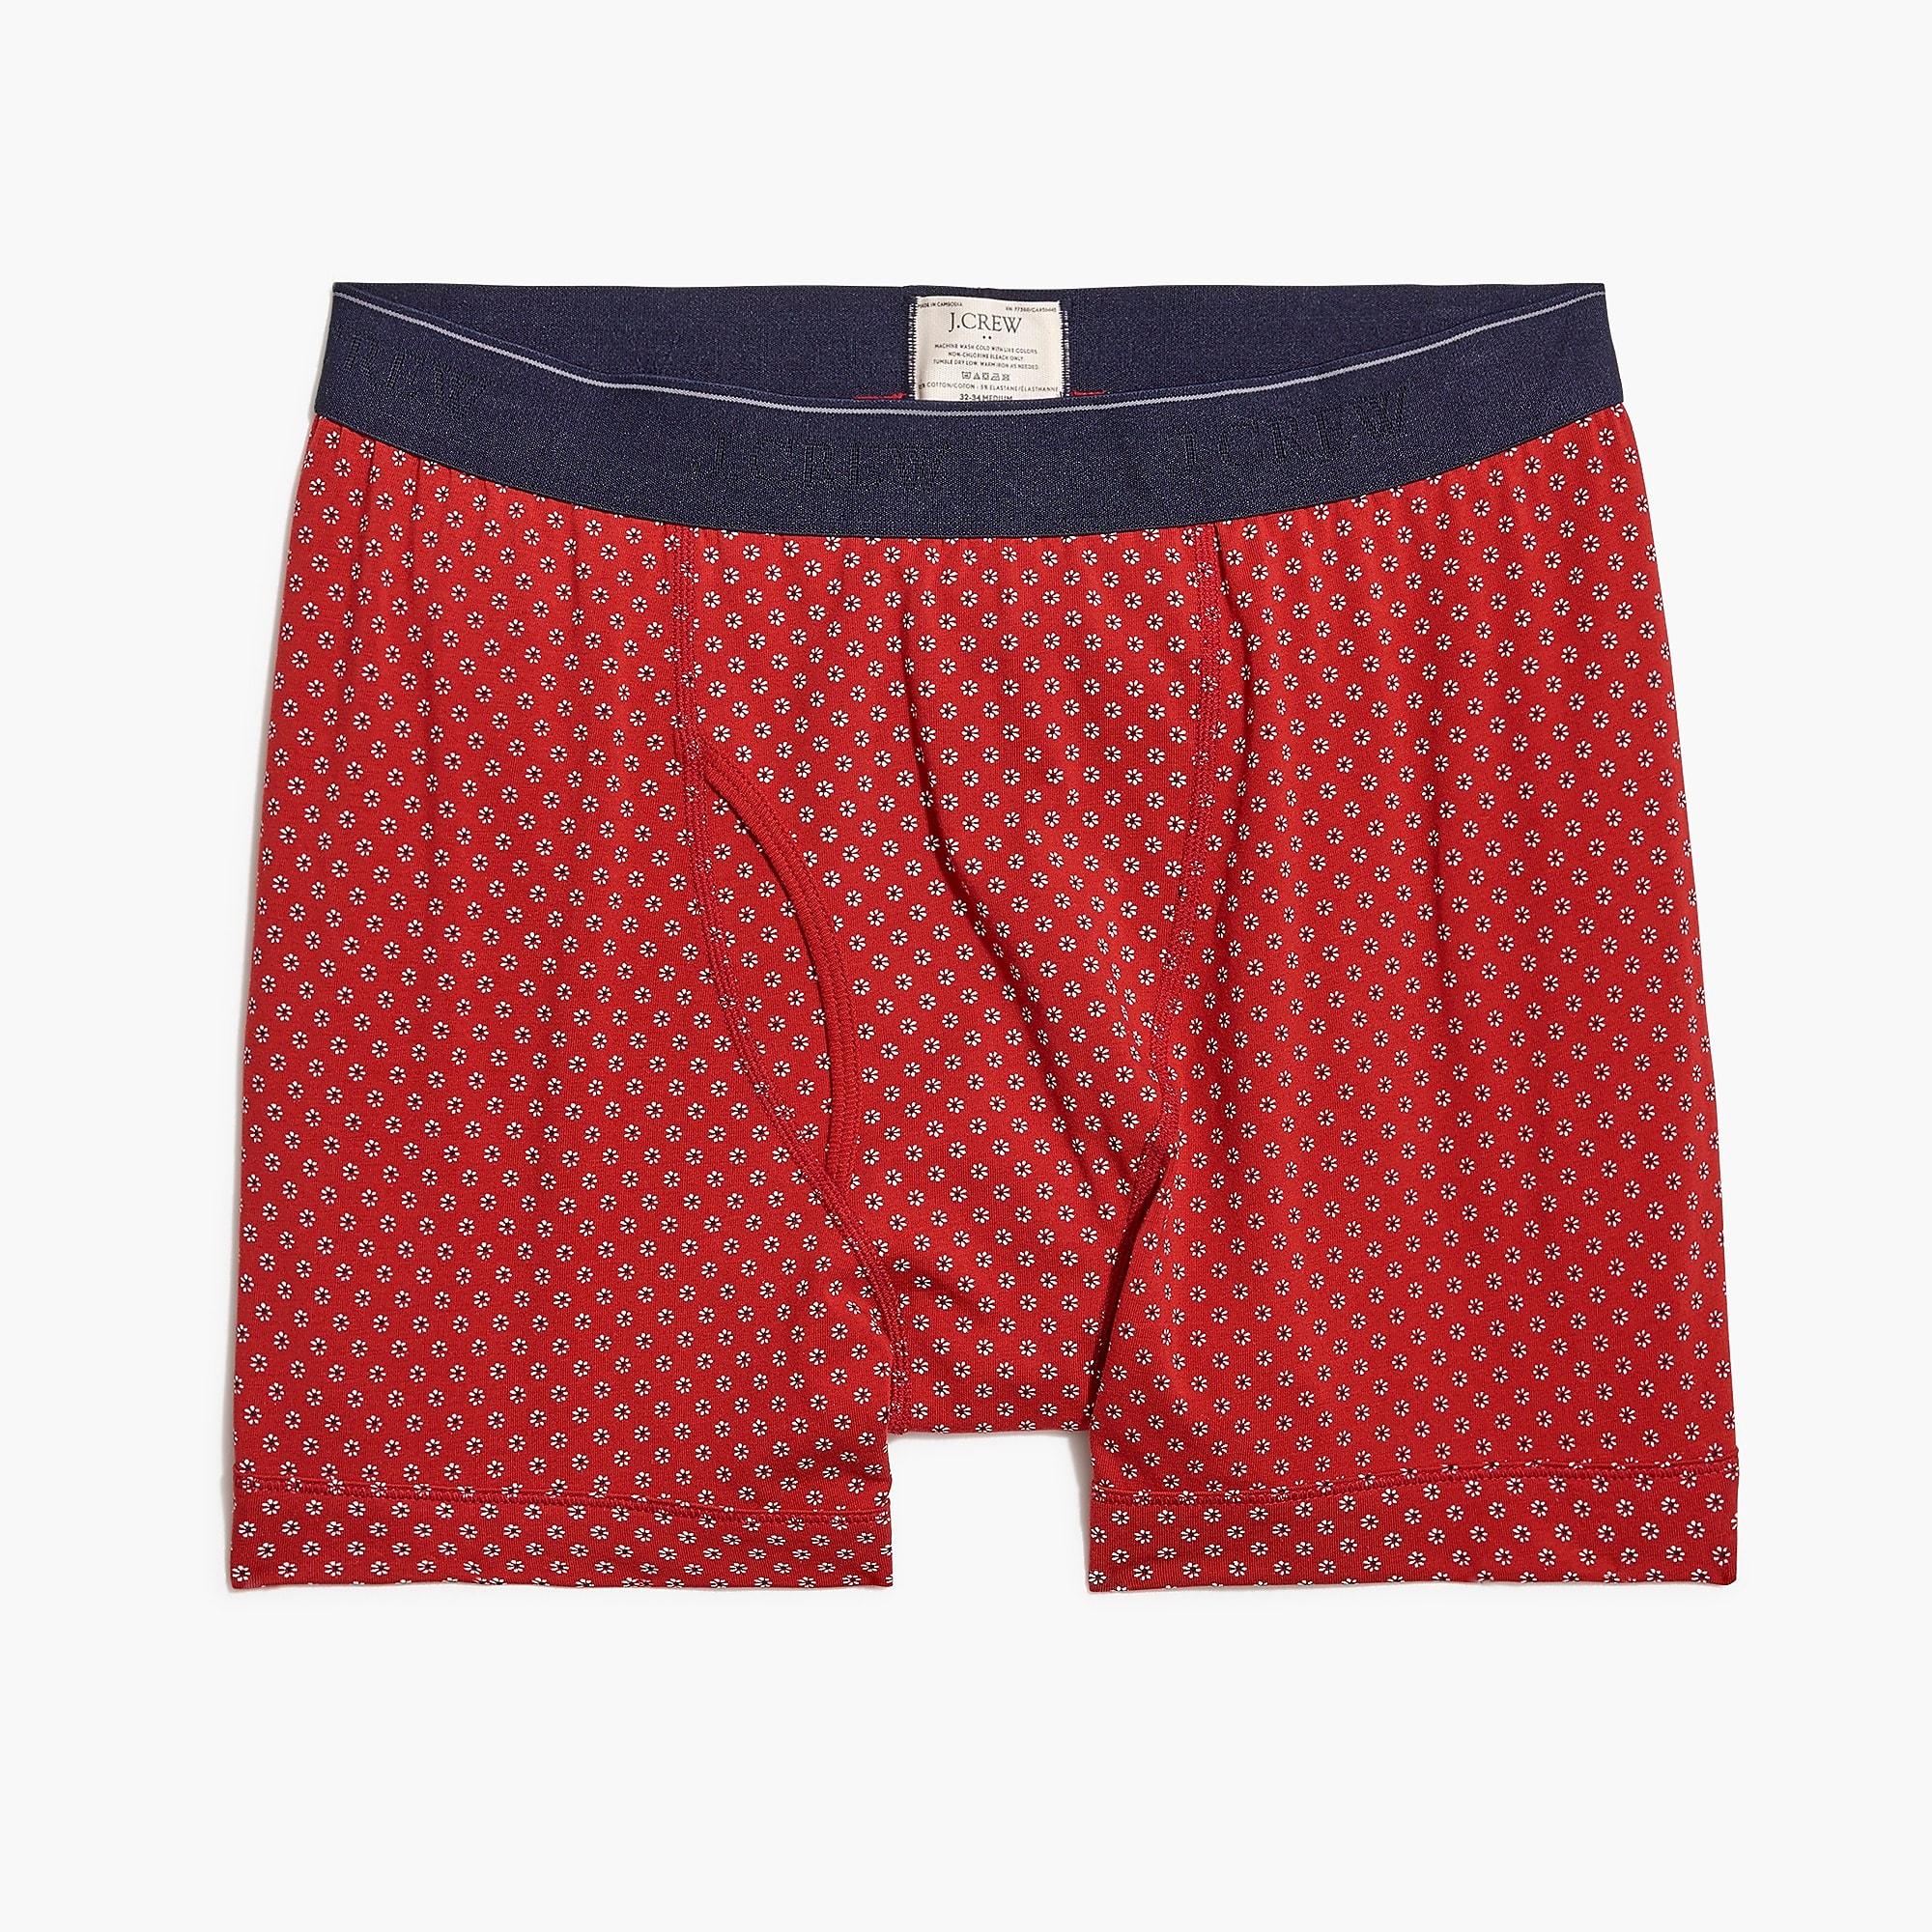 J.Crew Cotton Daisy Boxer Briefs in Red for Men - Lyst